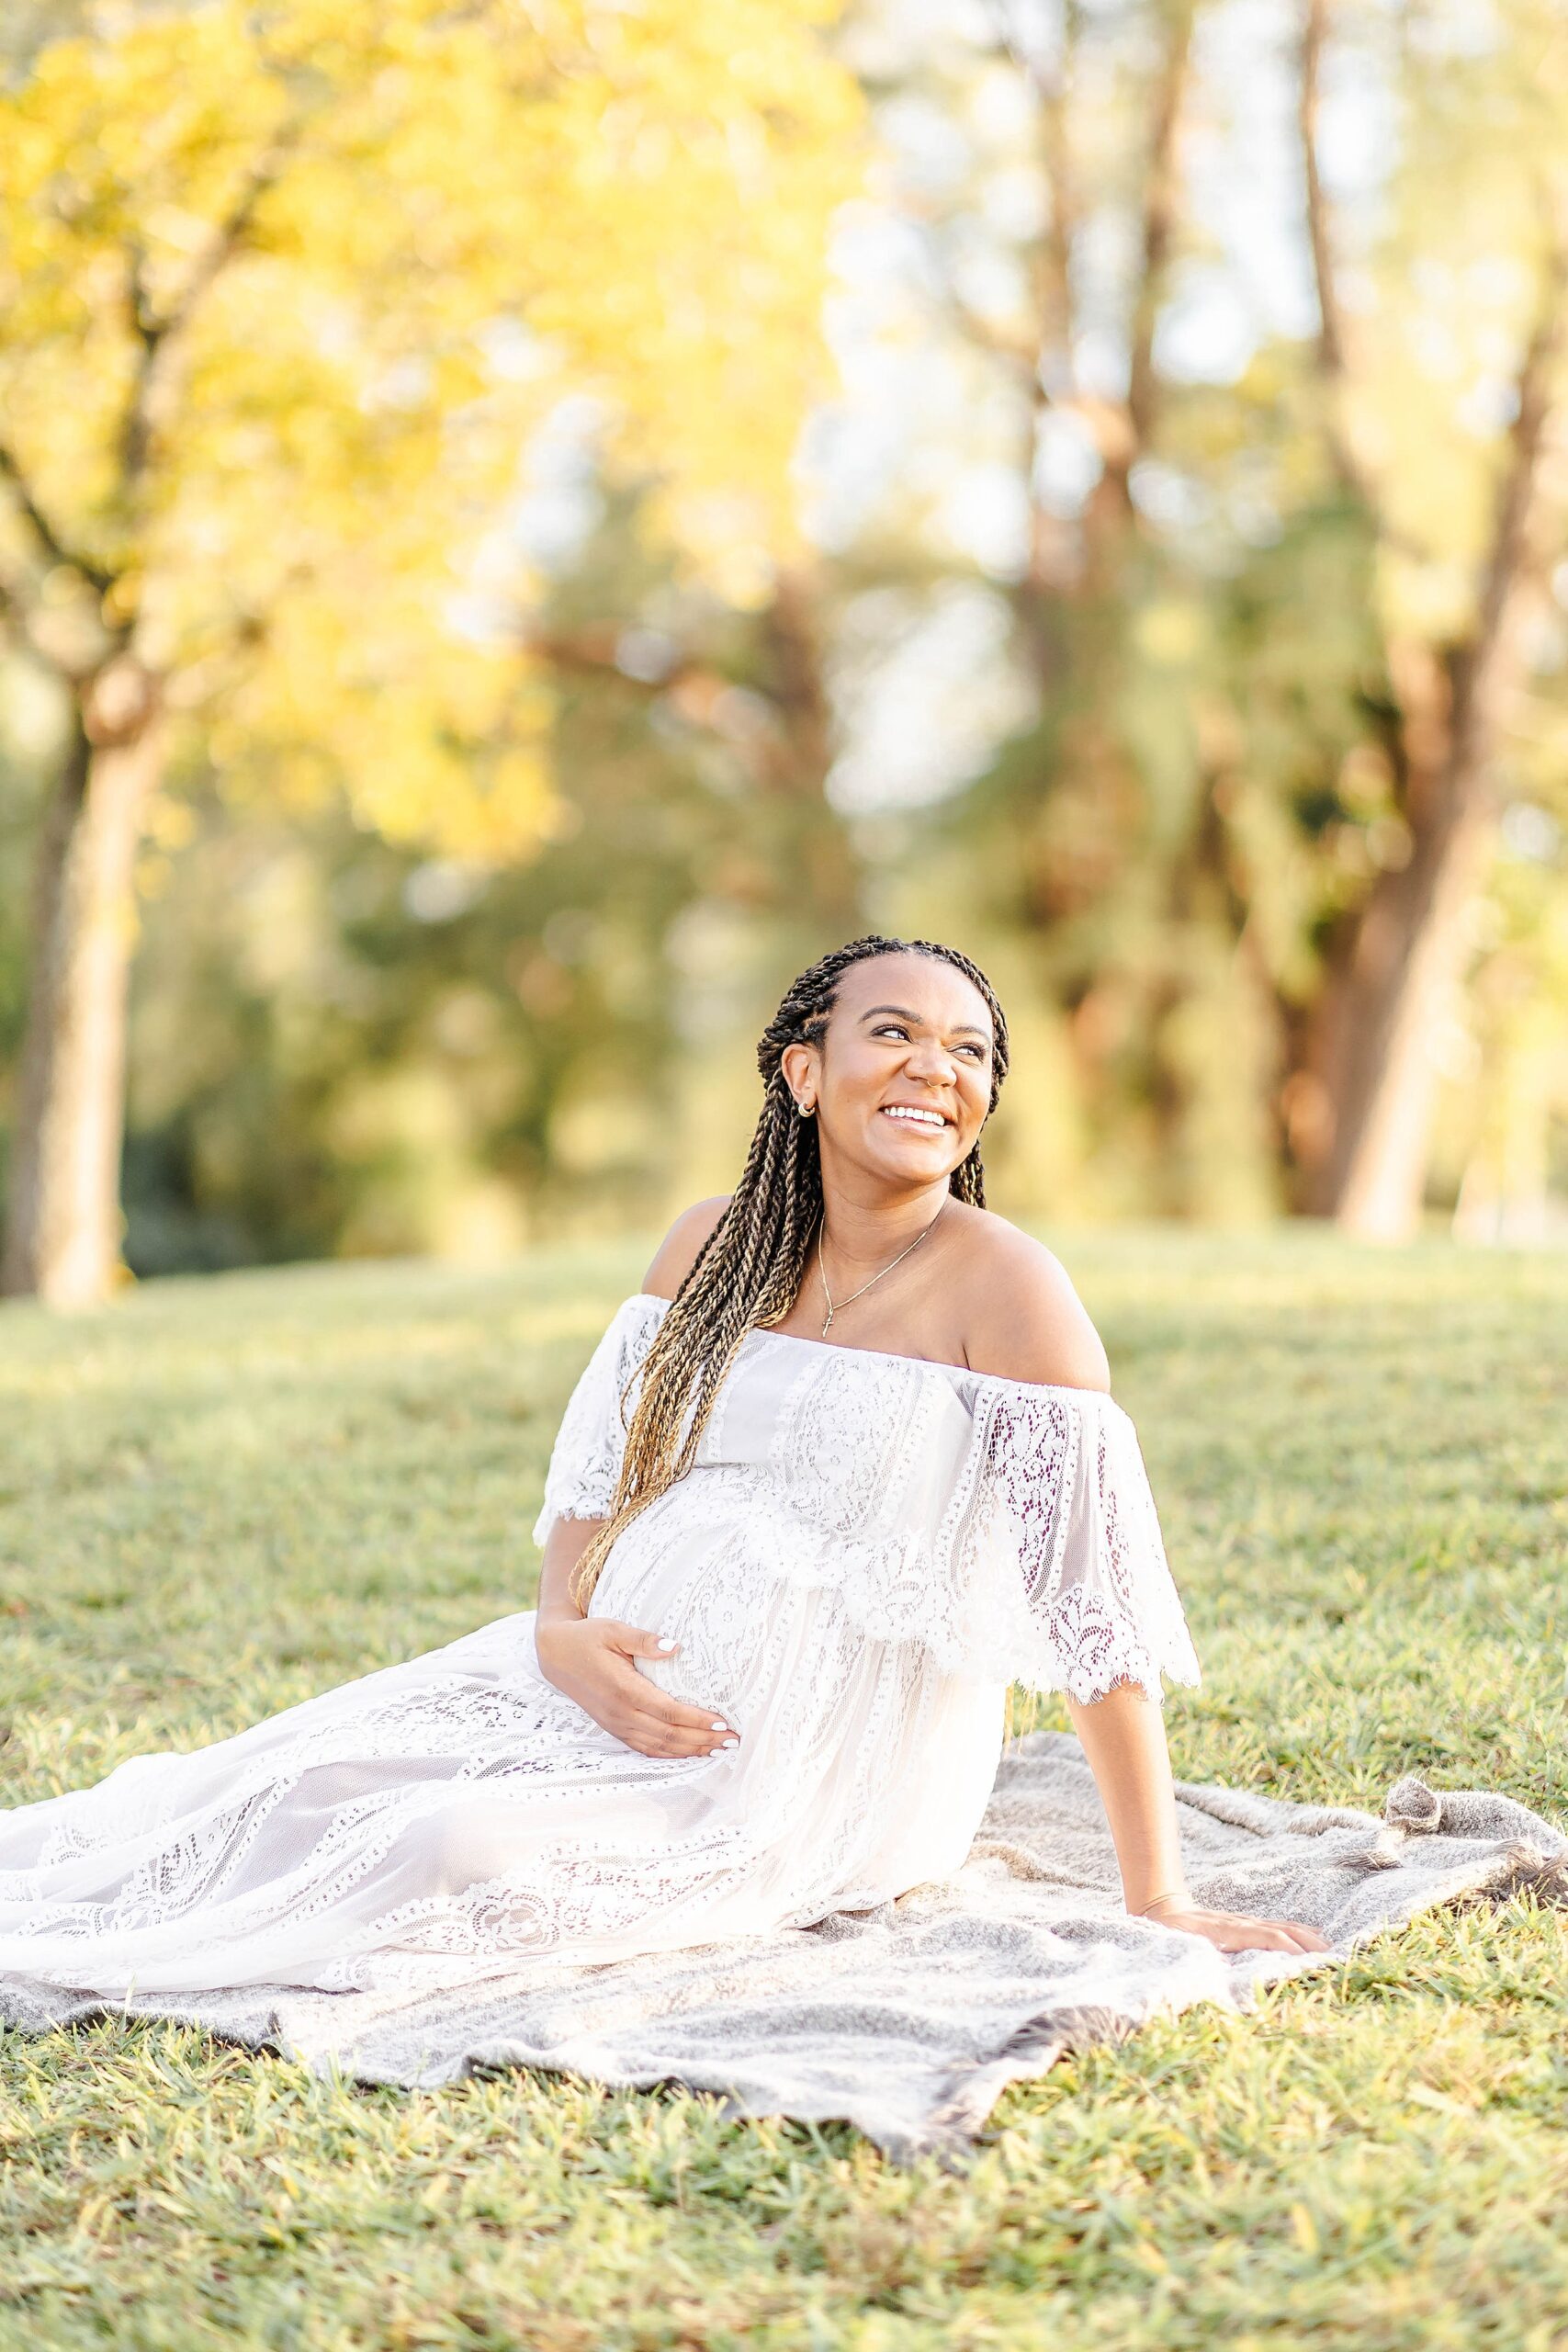 A happy mother to be in a white lace dress sits on a picnic blanket in a park at sunset after visiting a miami obgyn